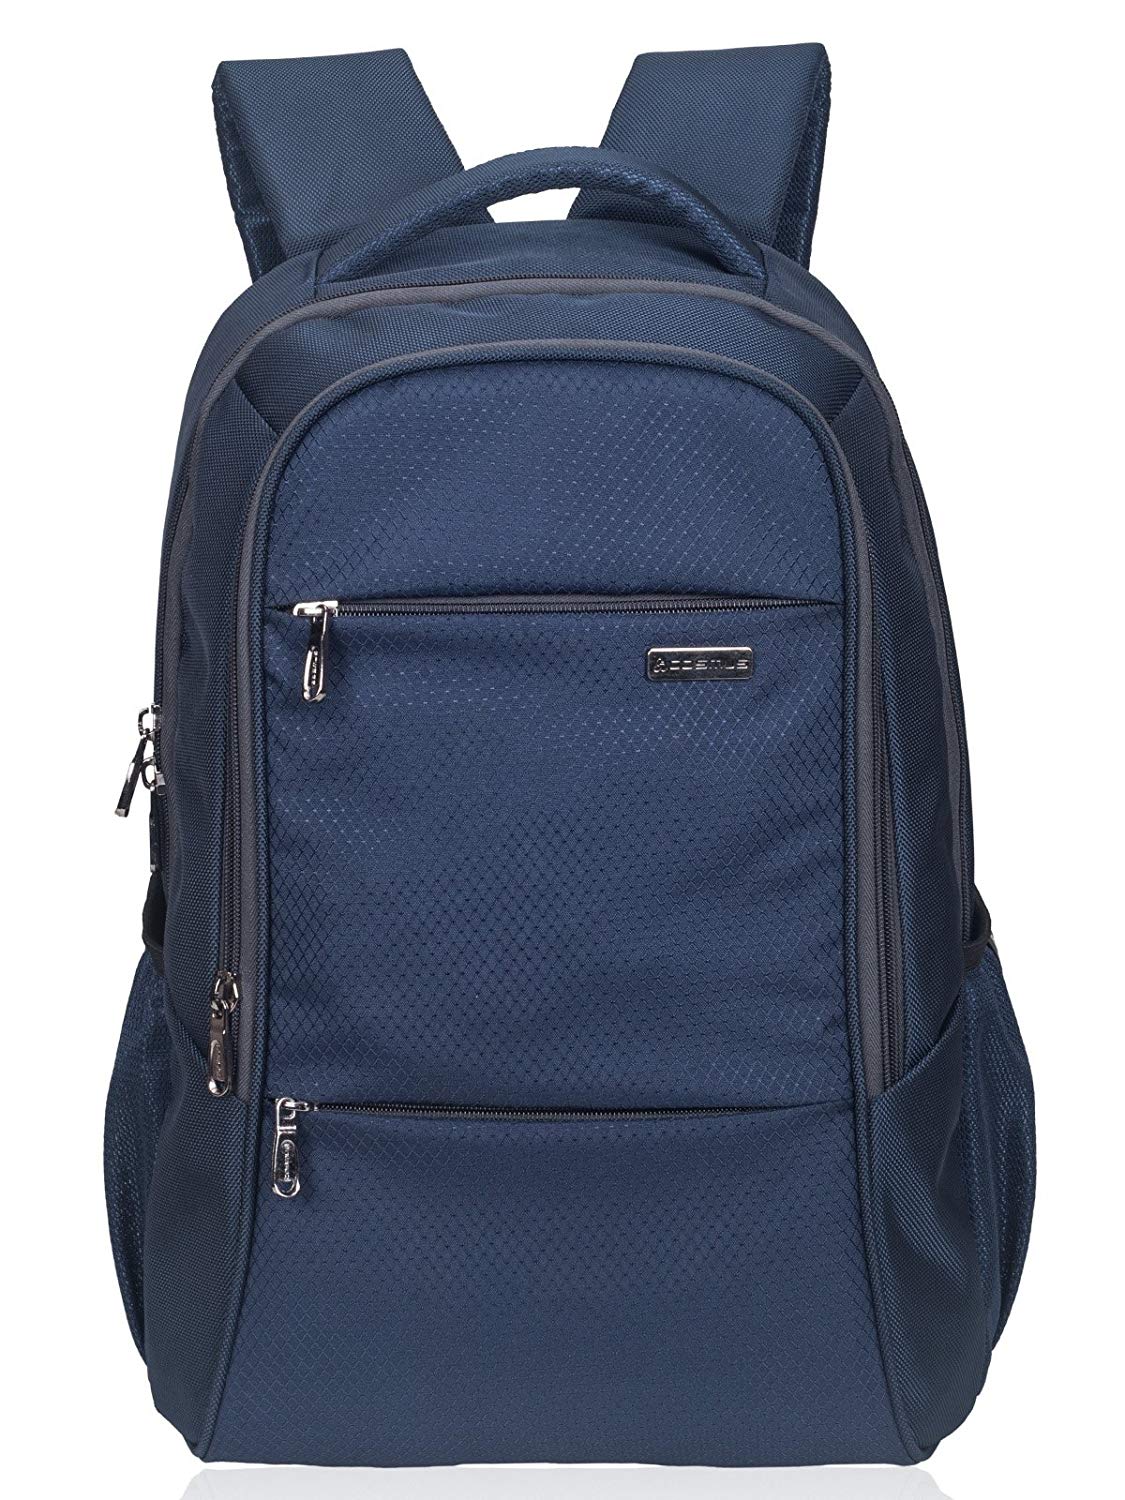 COSMUS Polyester Navy Blue Laptop Backpack for (15.6 inch)